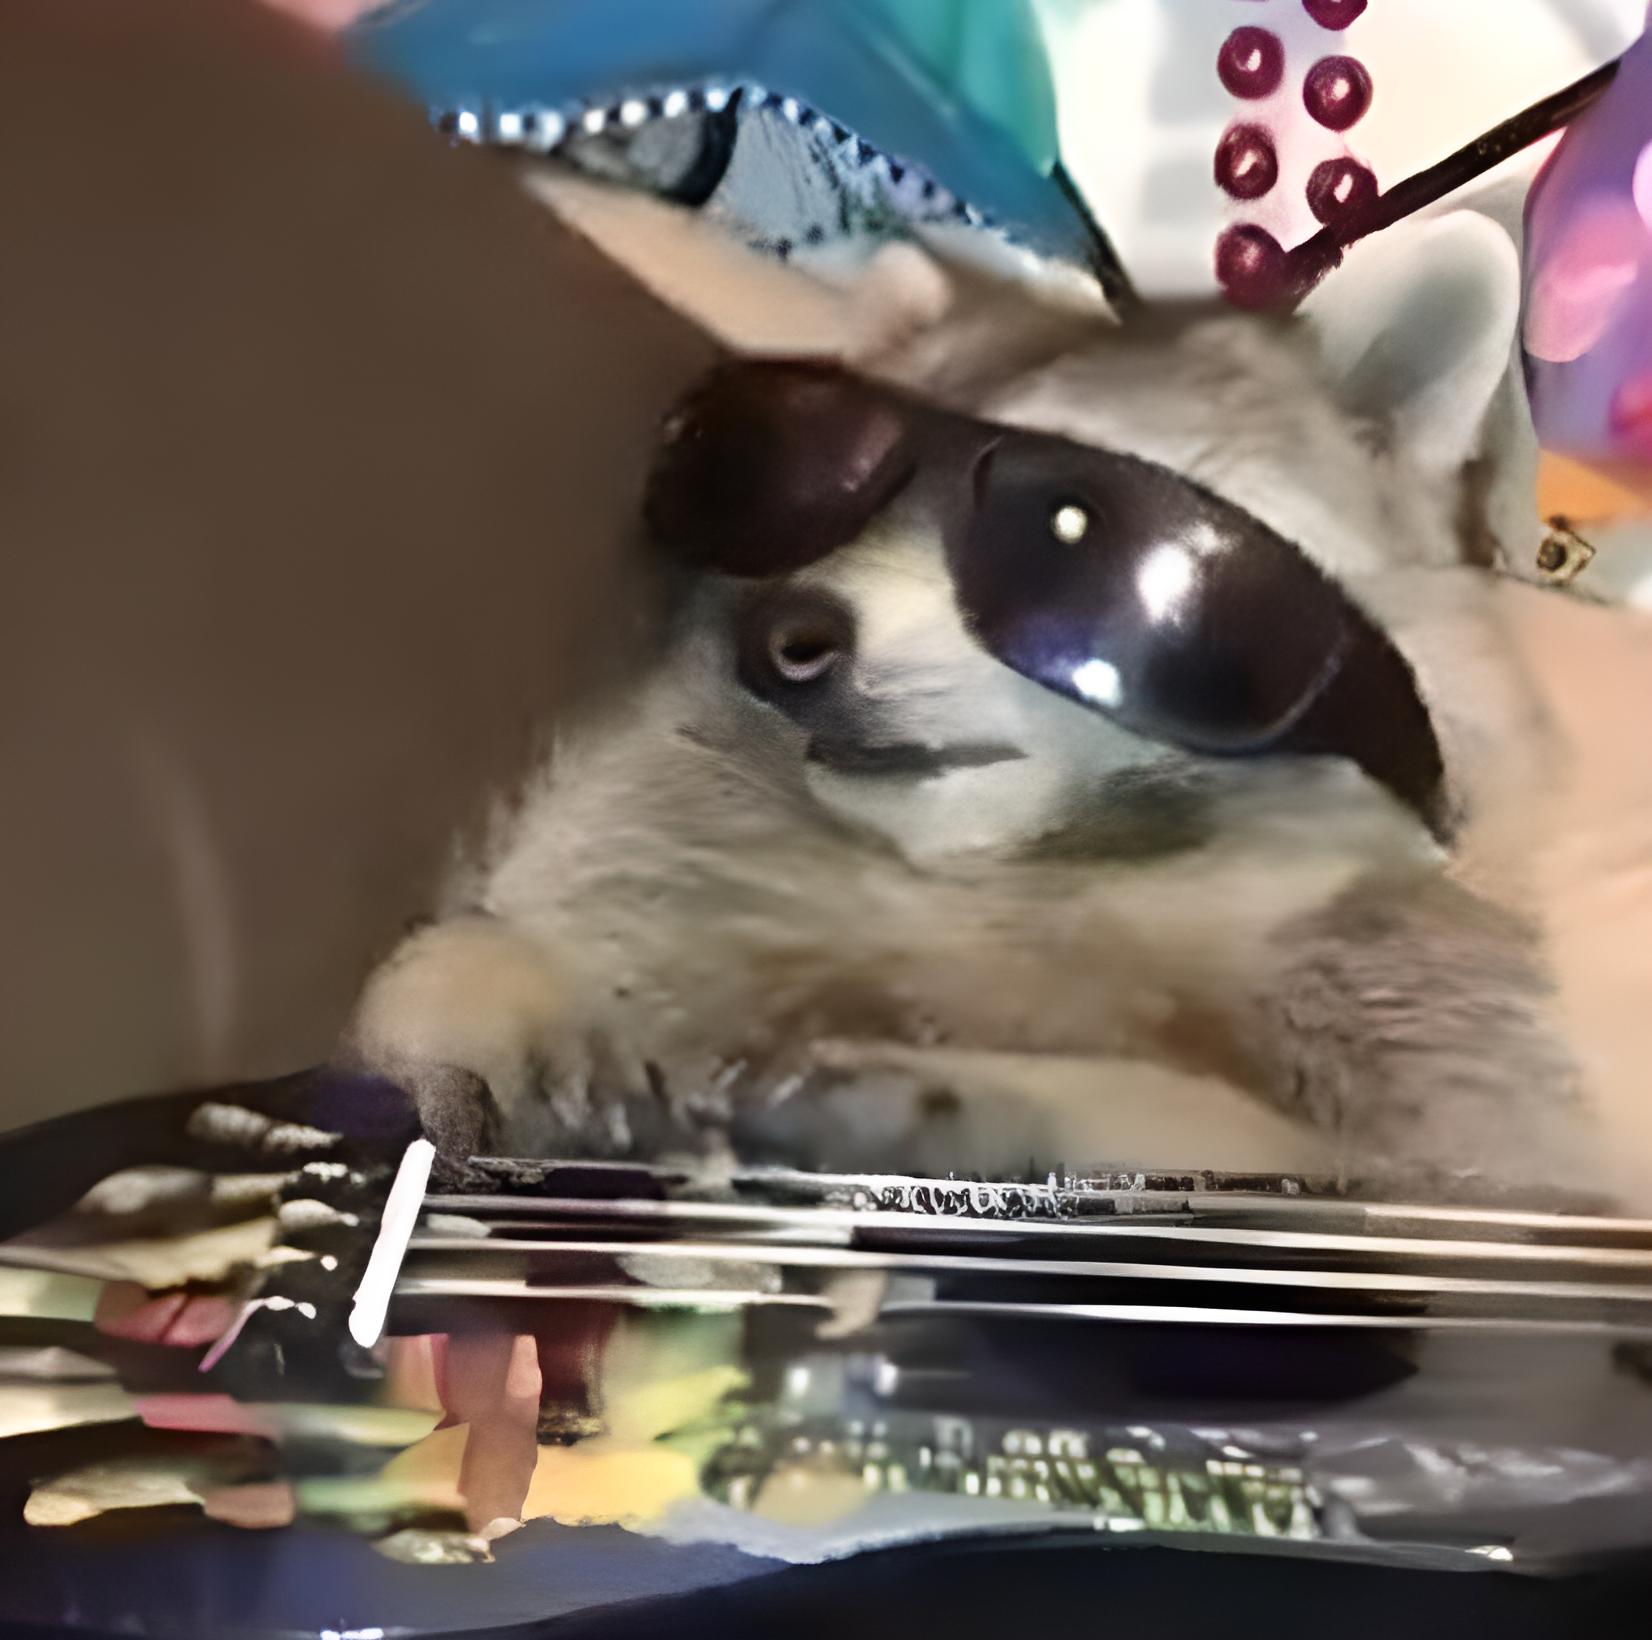 Avatar picture with racoon holding guitar